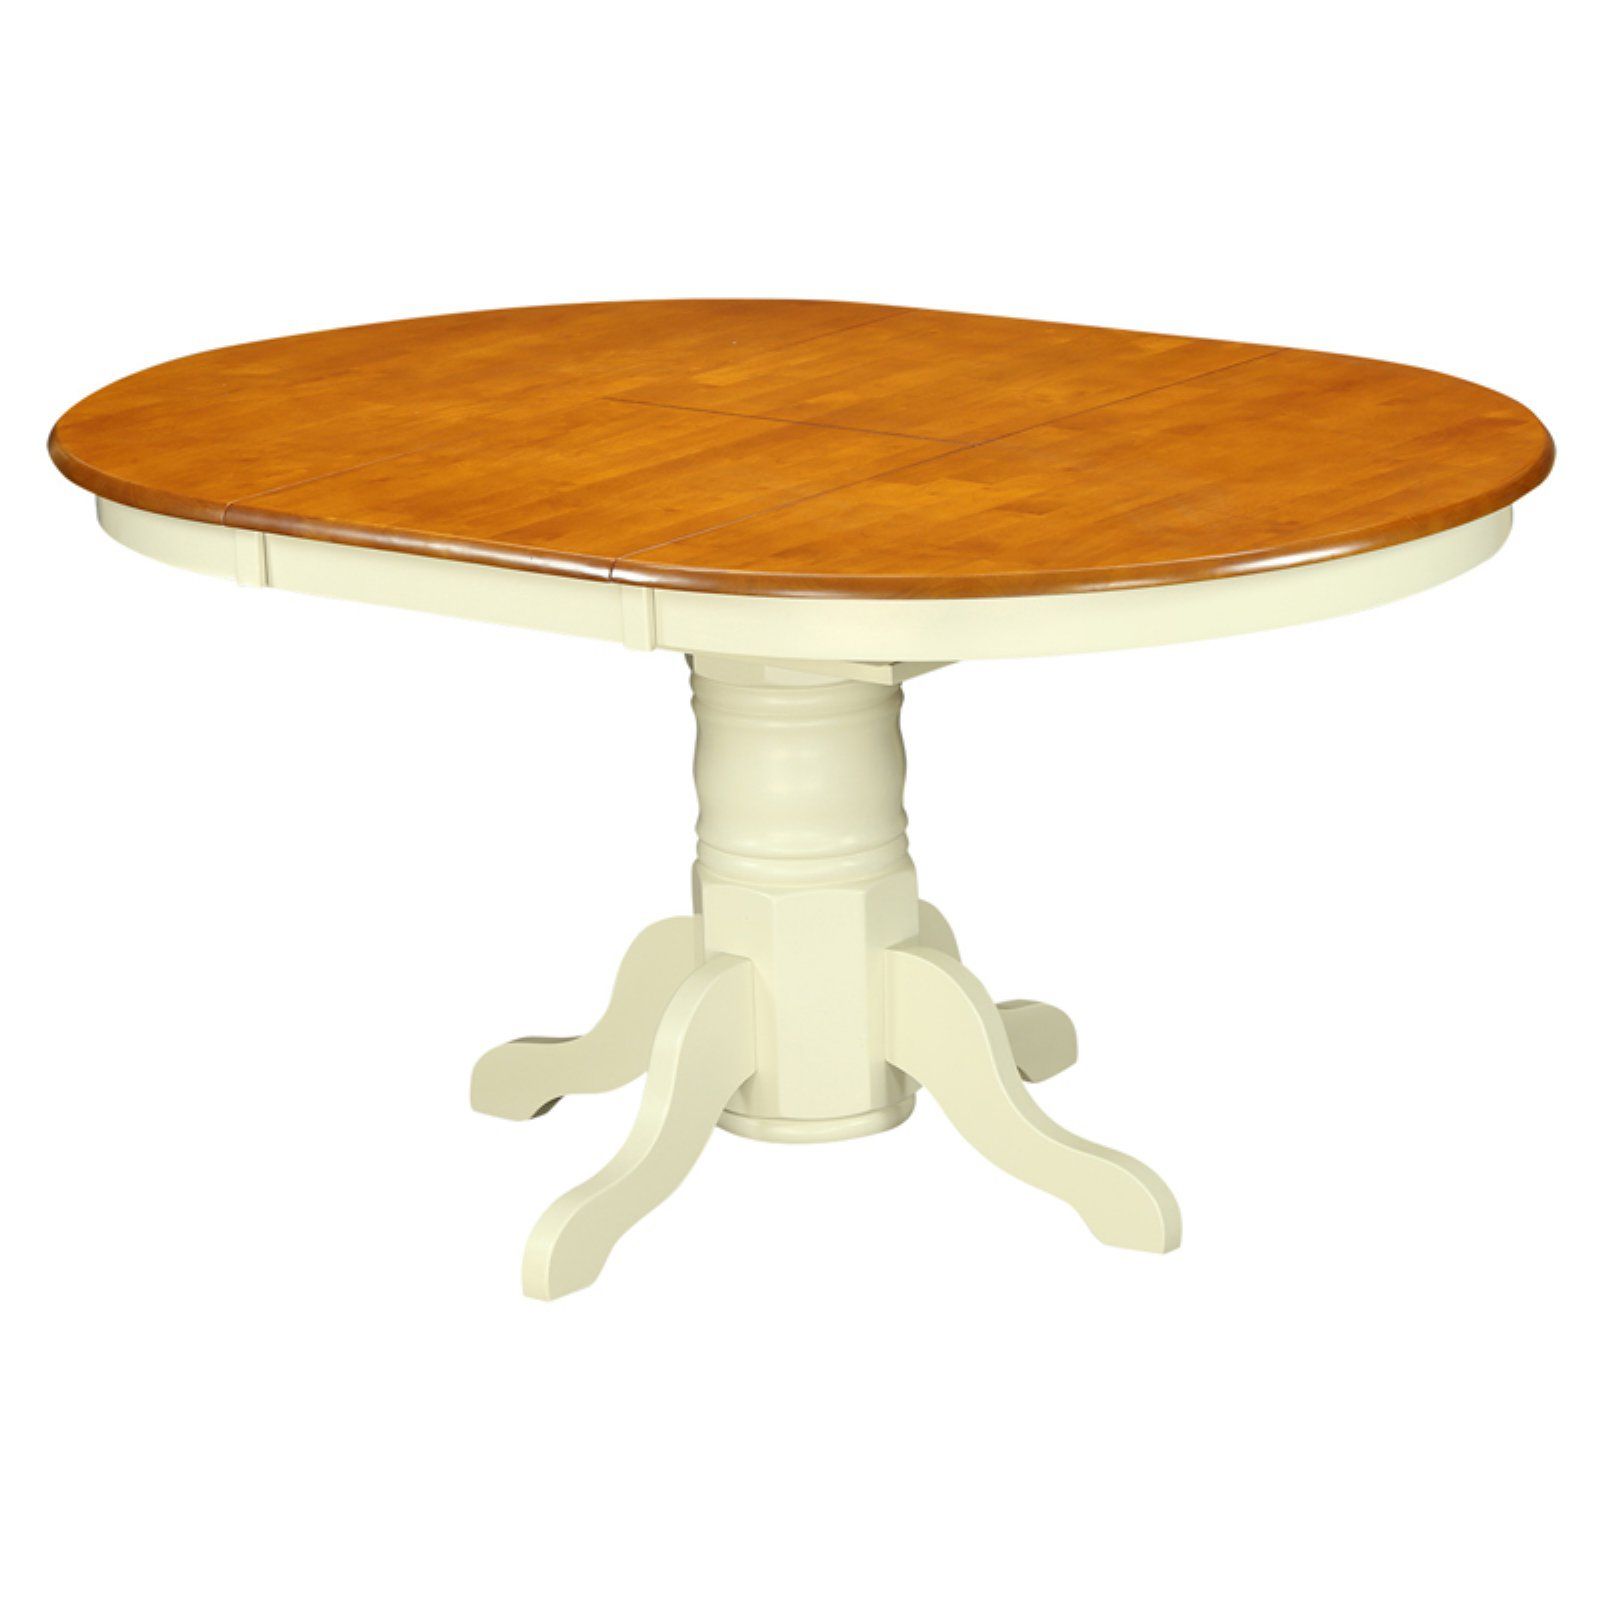 Round Pedestal Dining Tables With One Leaf Pertaining To Newest East West Furniture Avon 42 60 Inch Oval Pedestal Dining (View 13 of 15)